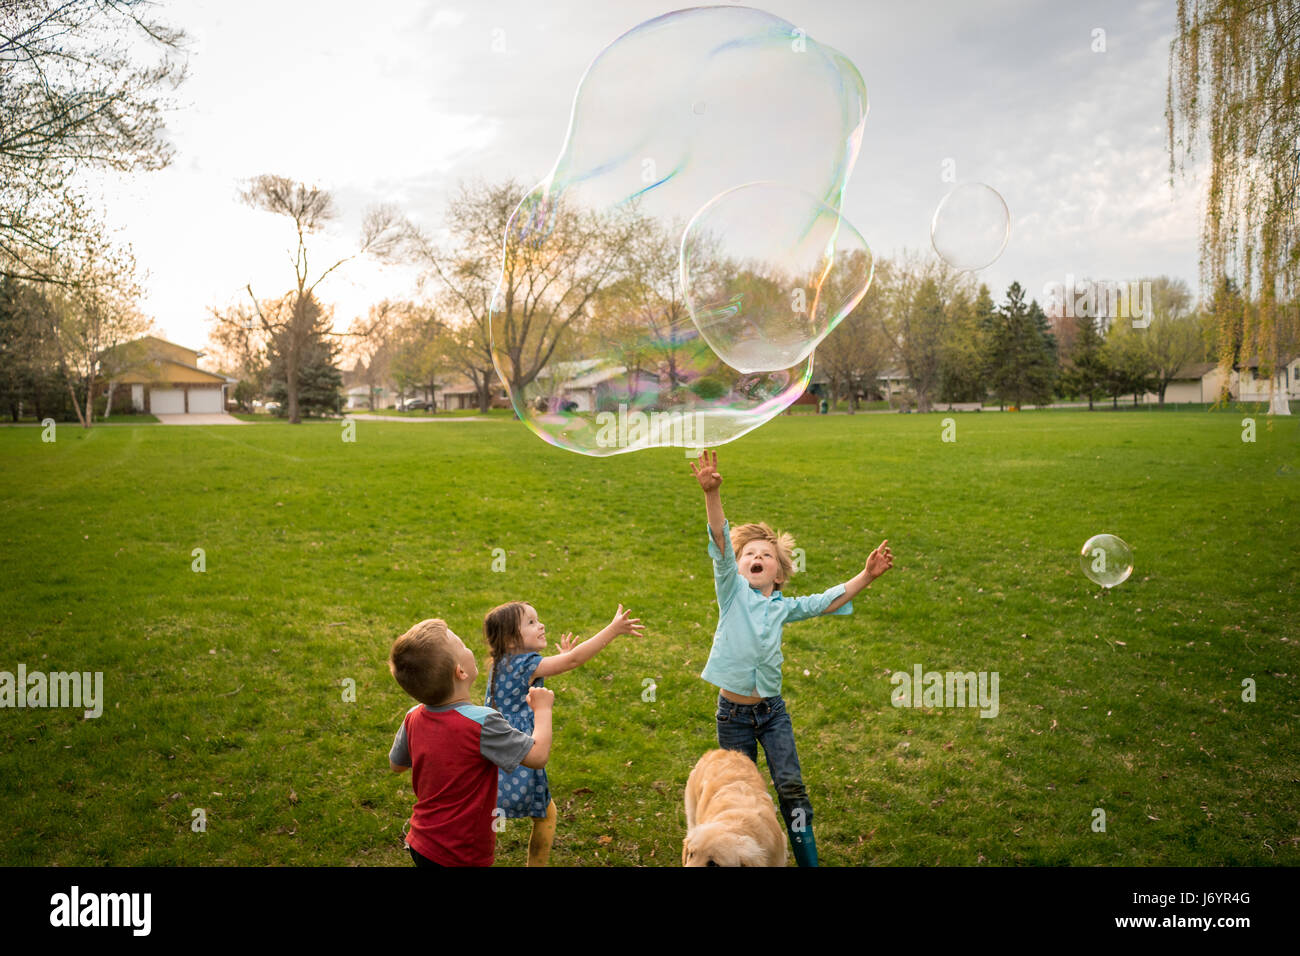 Three children playing with giant soap bubbles Stock Photo